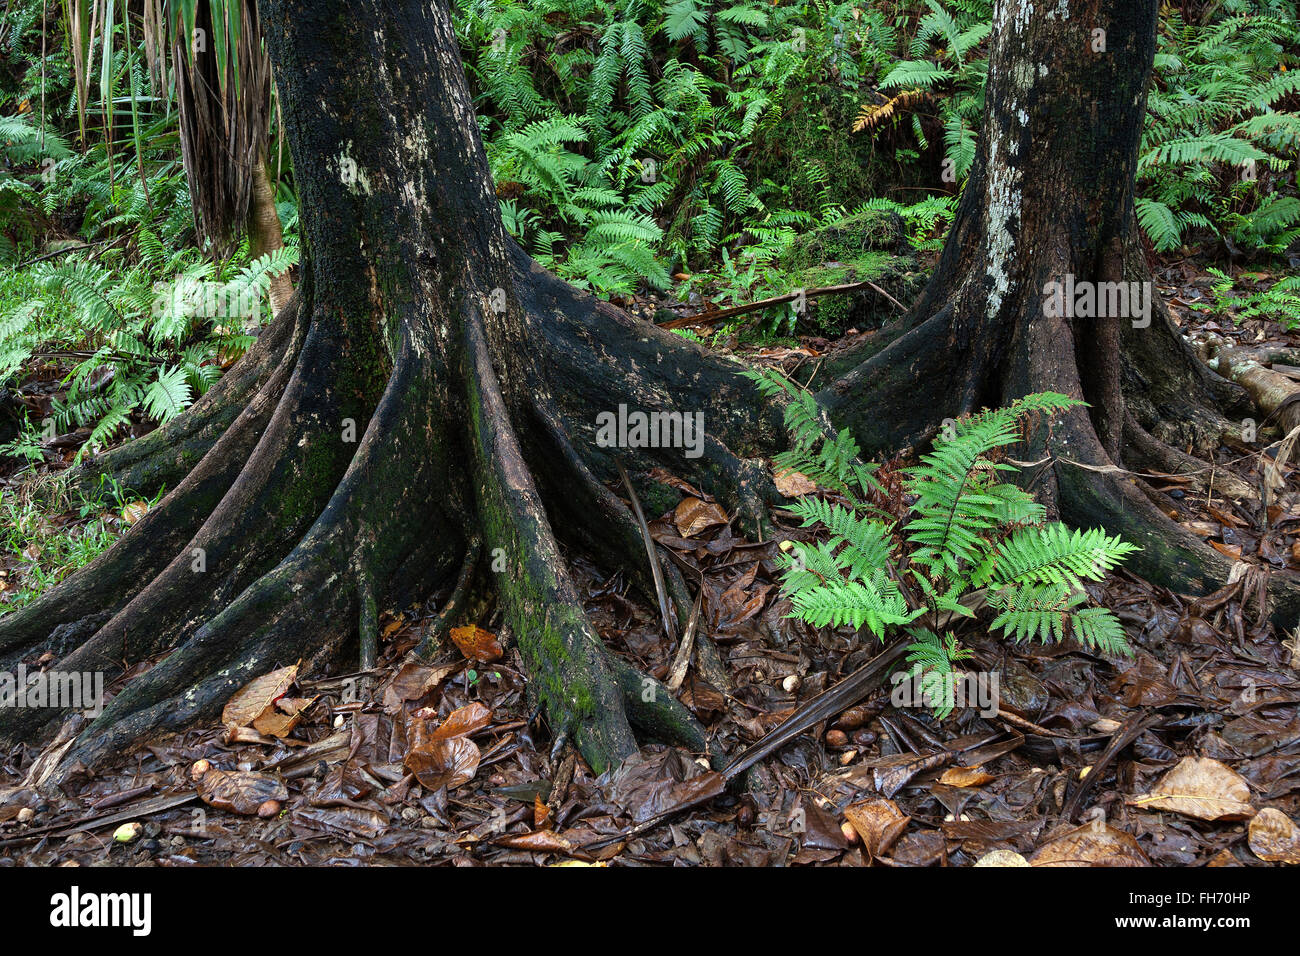 Tree trunks and tropical vegetation, near Anse des Cascades in Piton Sainte-Rose, Reunion, Africa Stock Photo